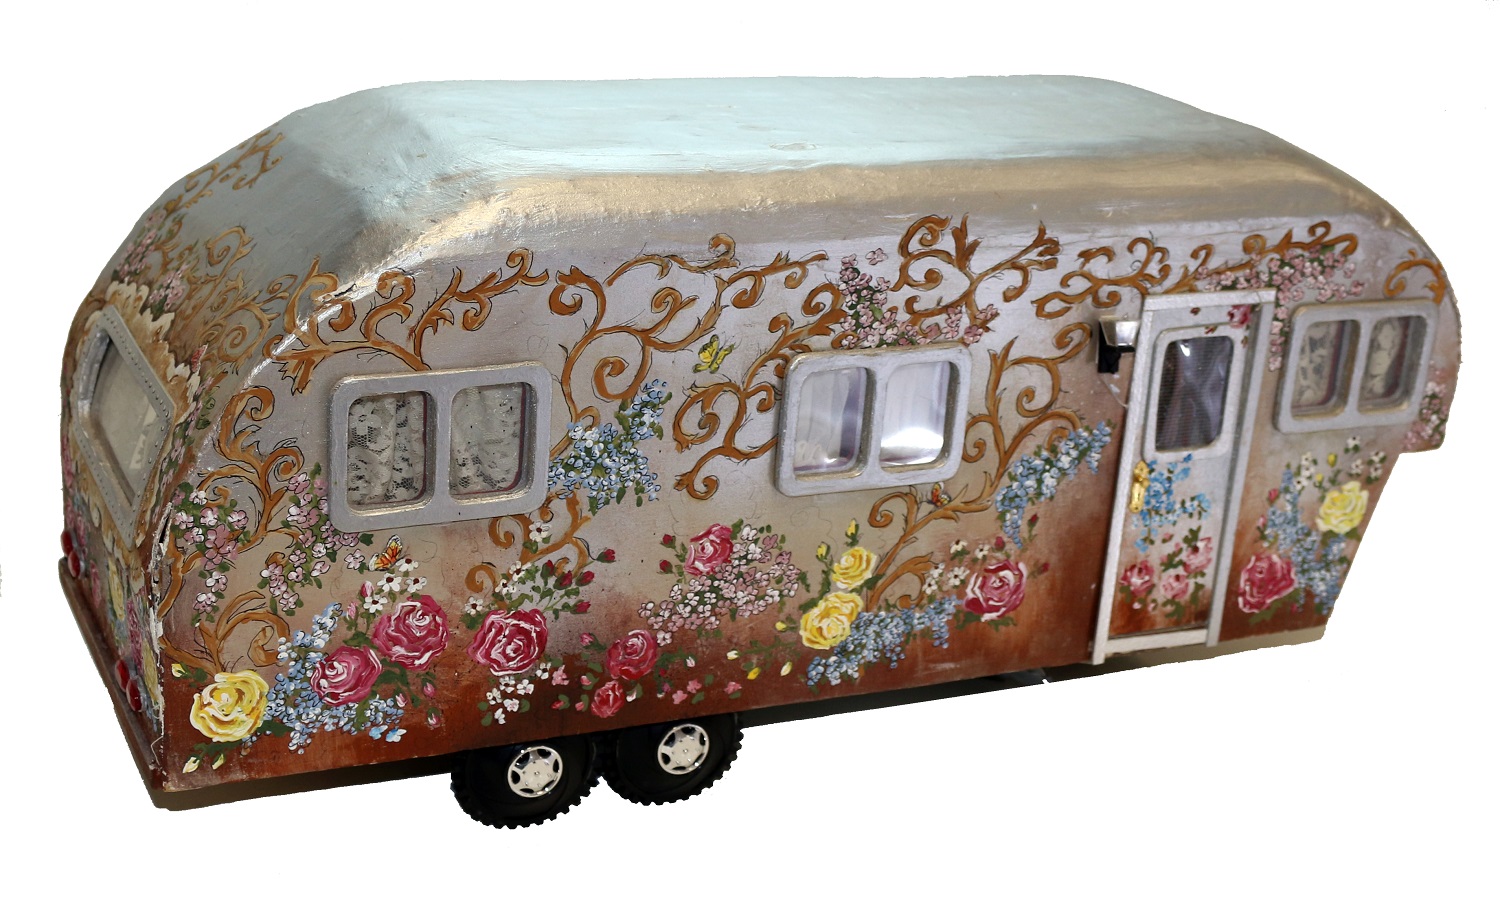 This miniature trailer scene made by Buff Greaney is titled, “Feelin' Groovy.”